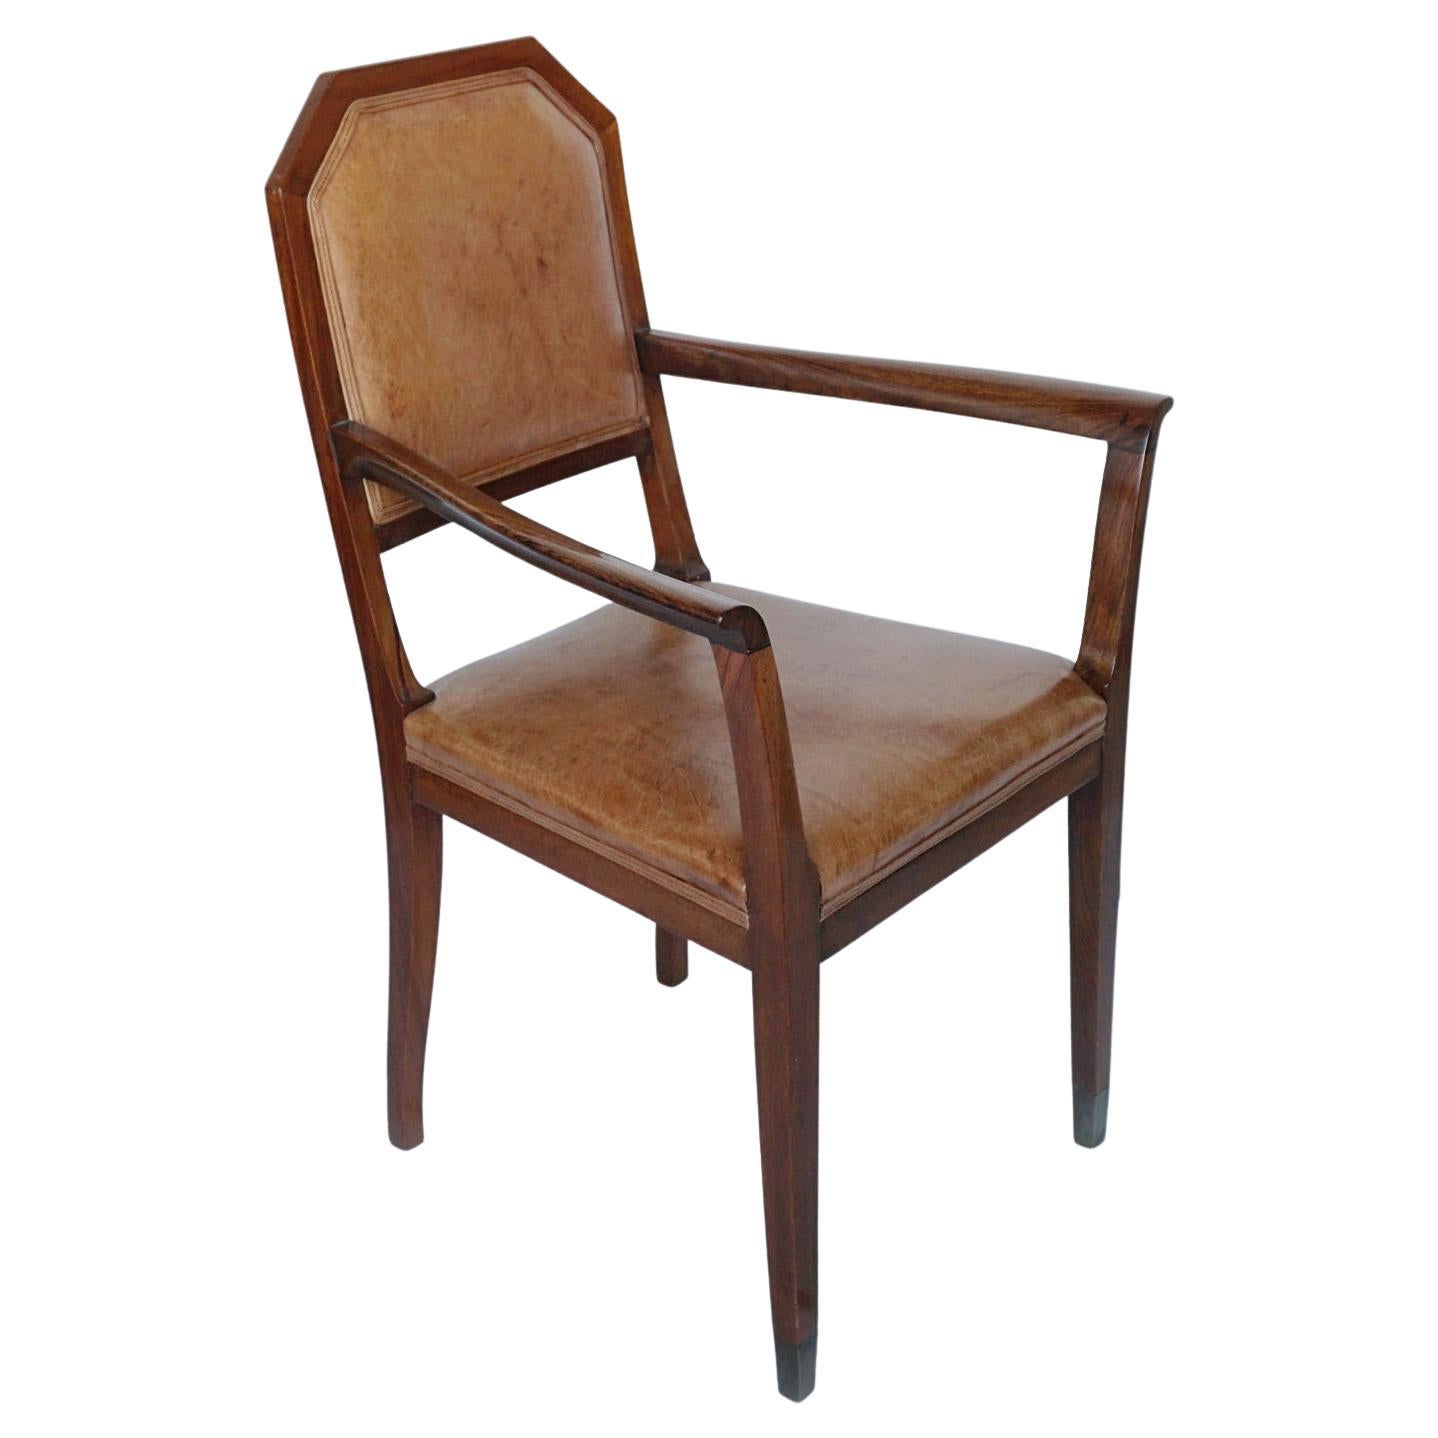 French Art Deco Desk Chair Walnut and Leather, Circa 1925